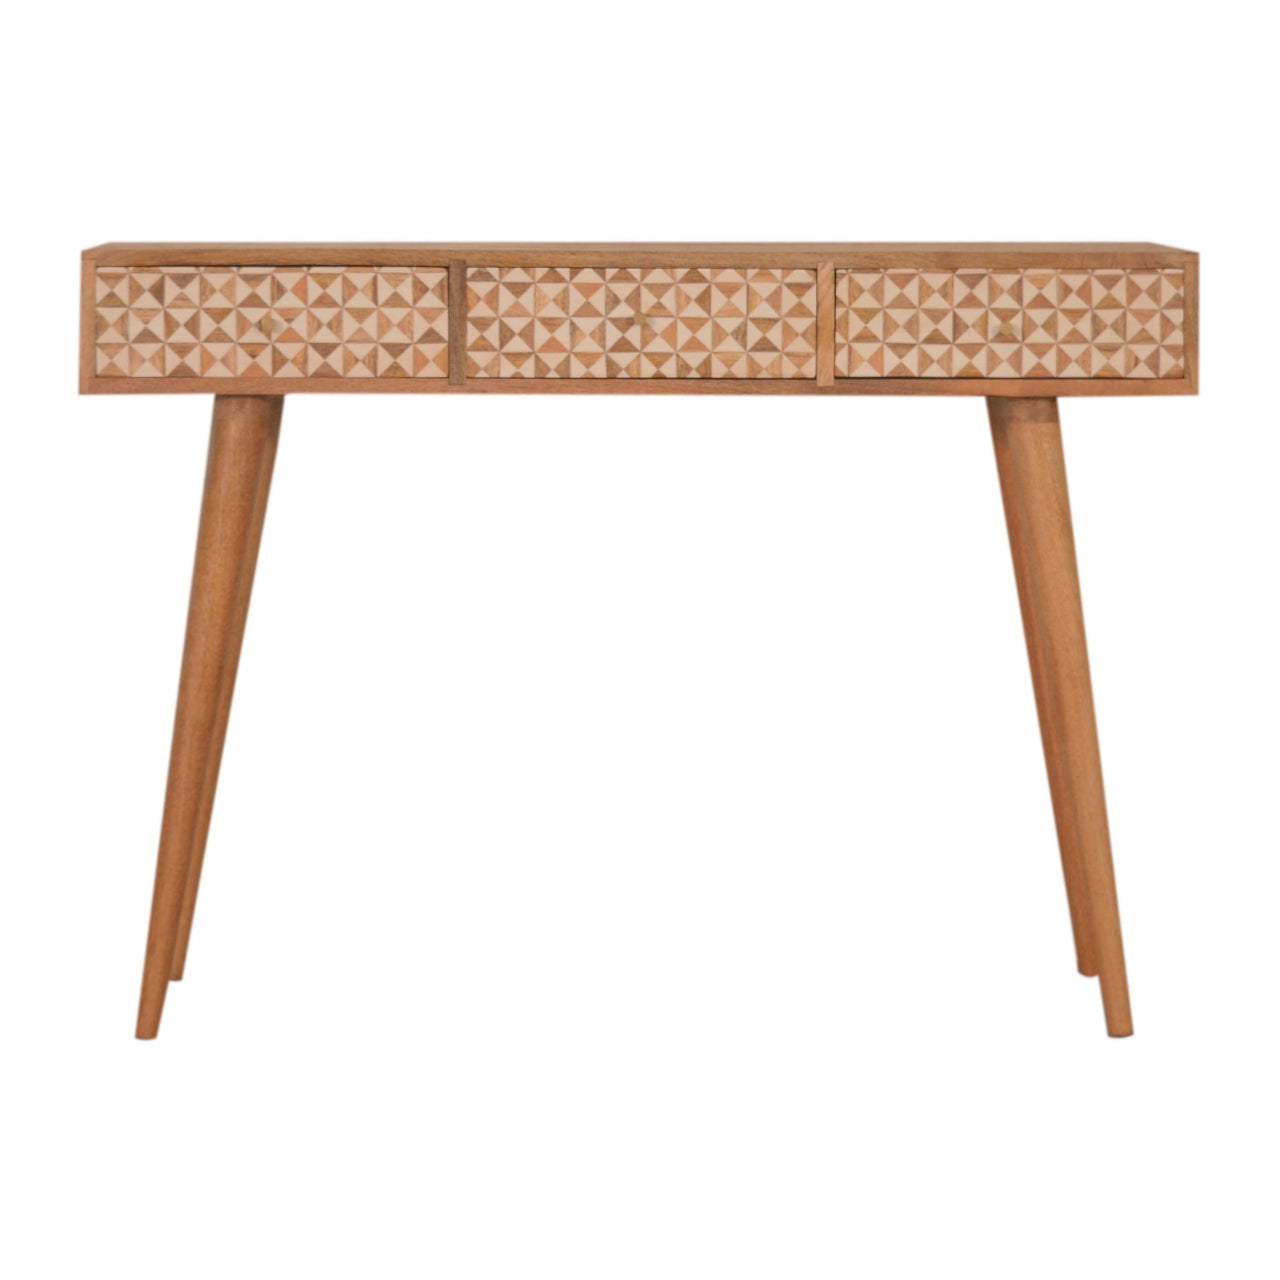 View Sarina Console Table information